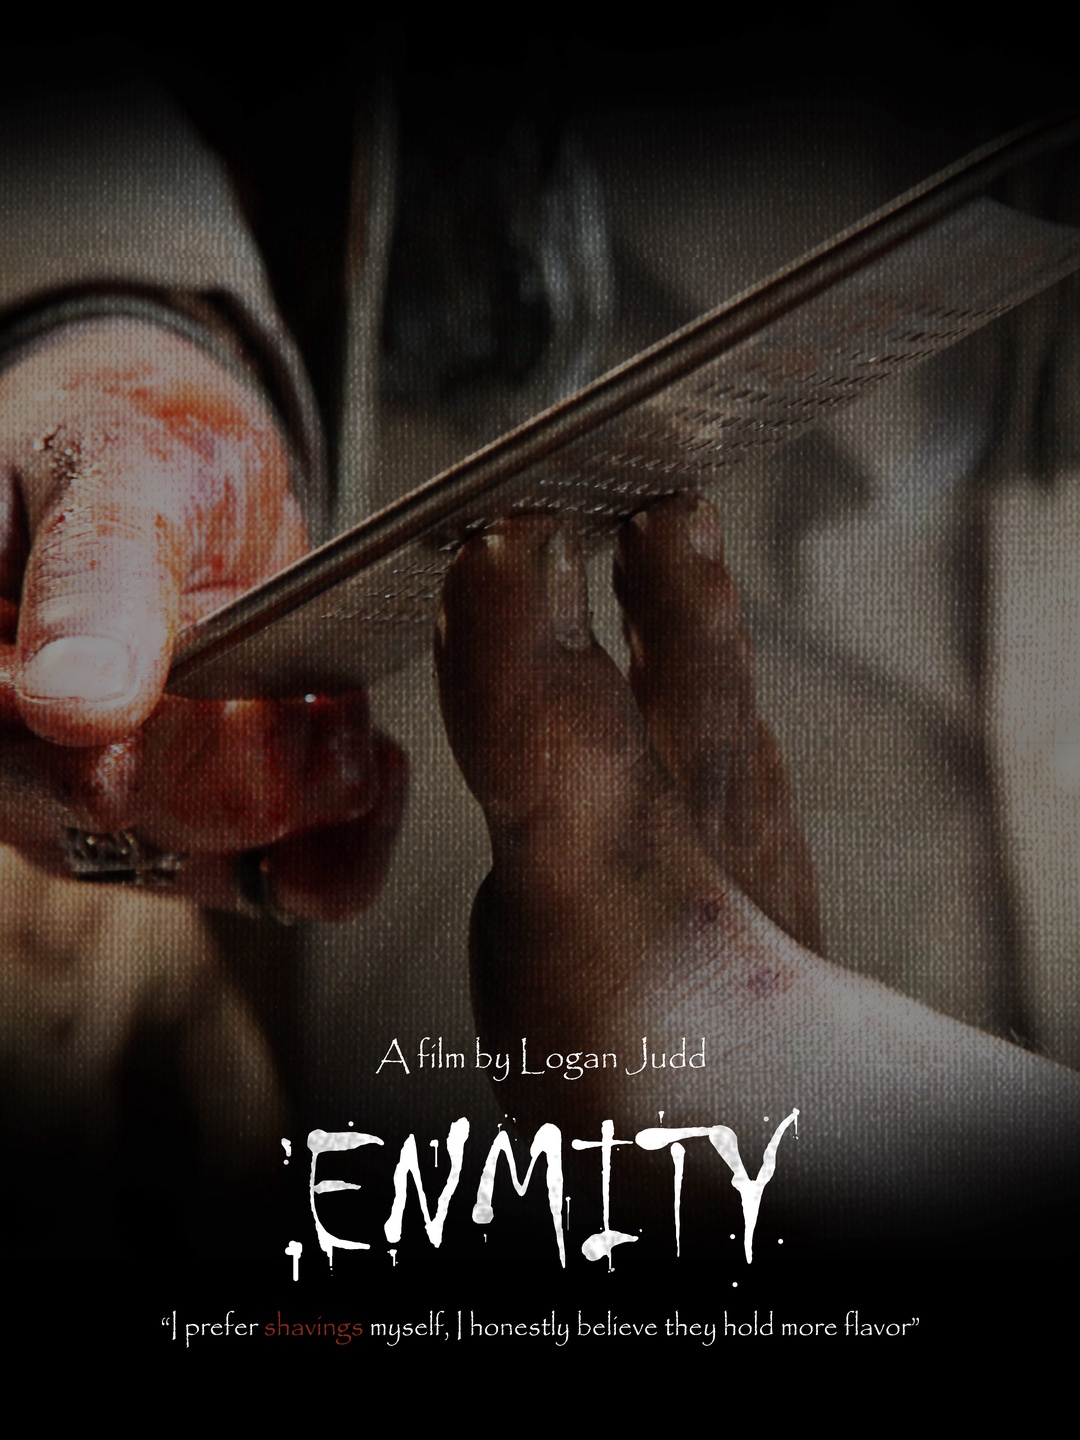 Enmity